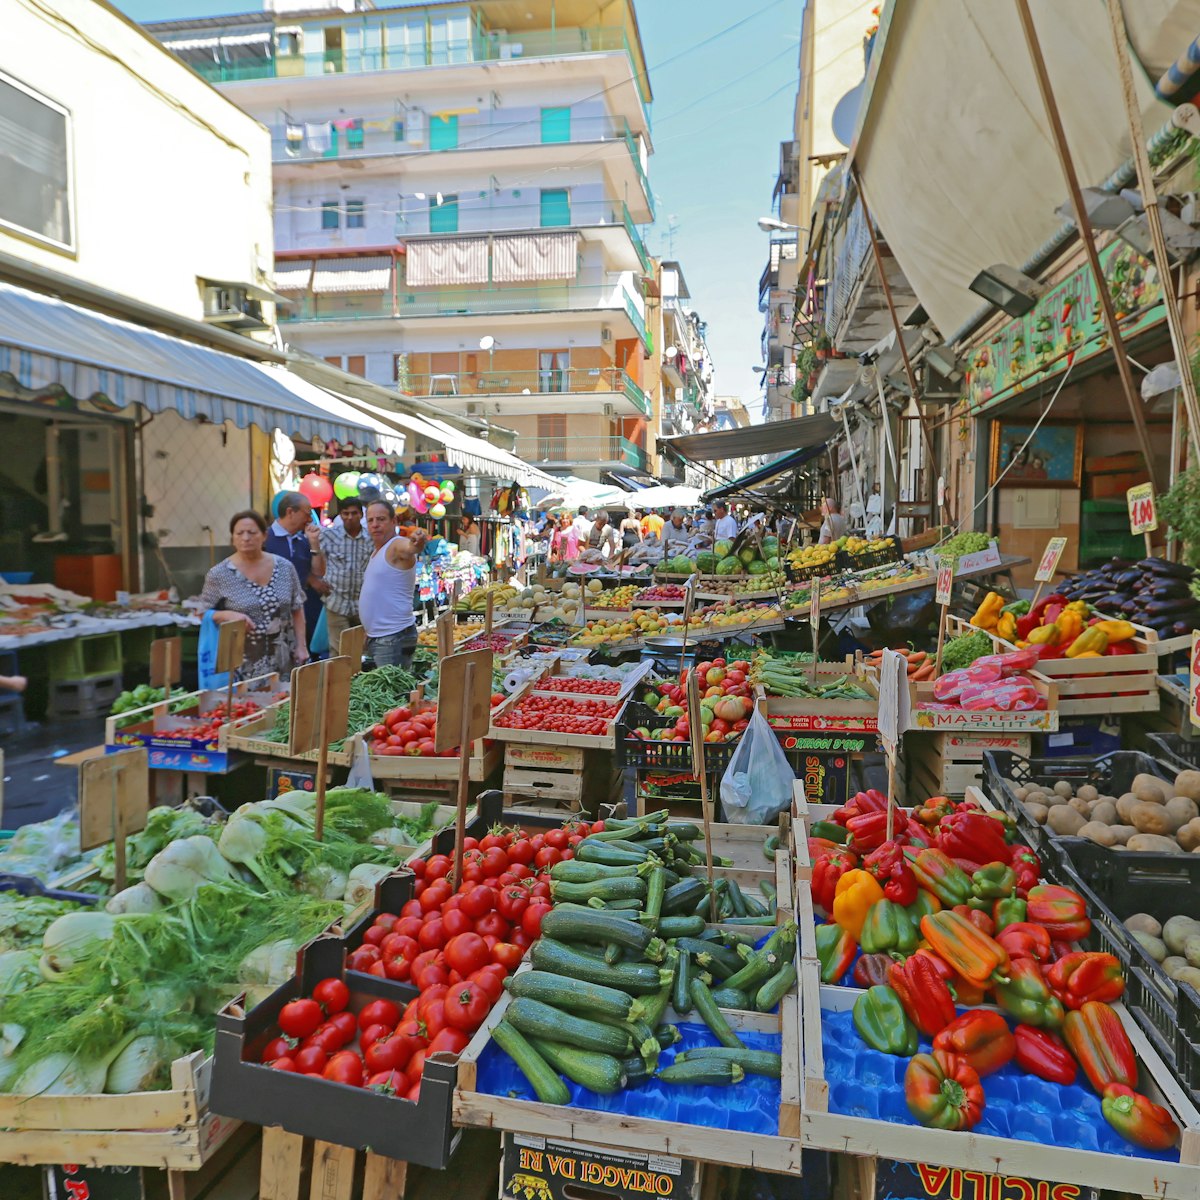 Naples, Italy - June 22, 2014: Local People Shopping at Sunday Street Market Porta Nolana in Napoli, Italy.
1254532382
naples, napoli, market, crowds, shoppers, editorial, stalls, browsing, assortment, goods, locals, ingredients, italians, contraband, vendors
